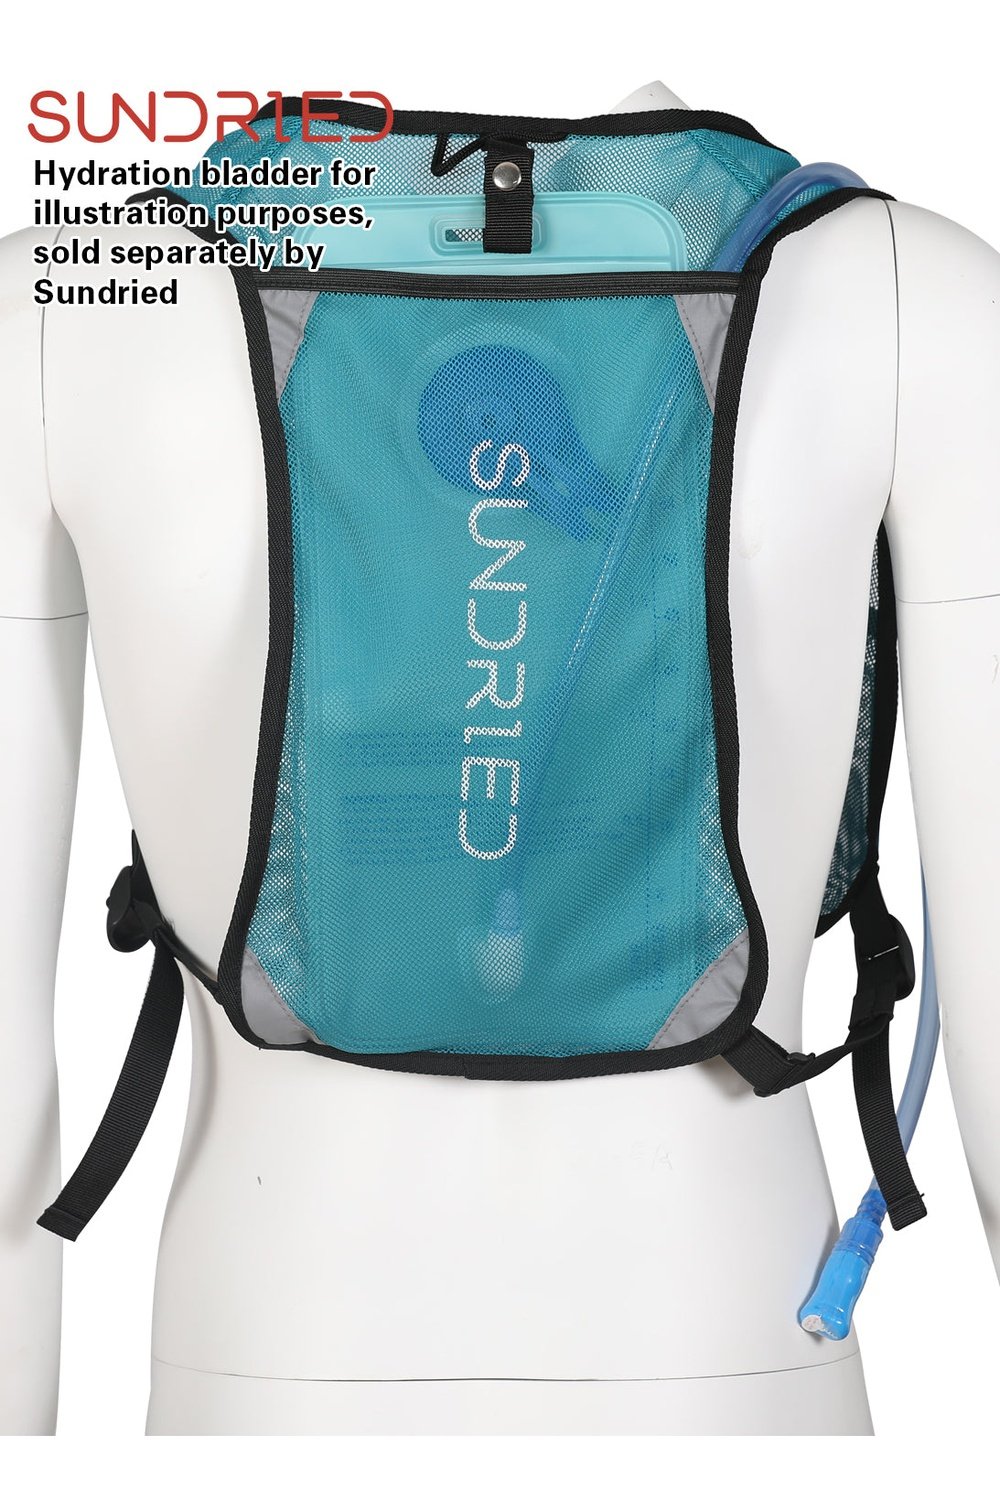 Sundried Mesh Backpack Bags SD0403 Activewear